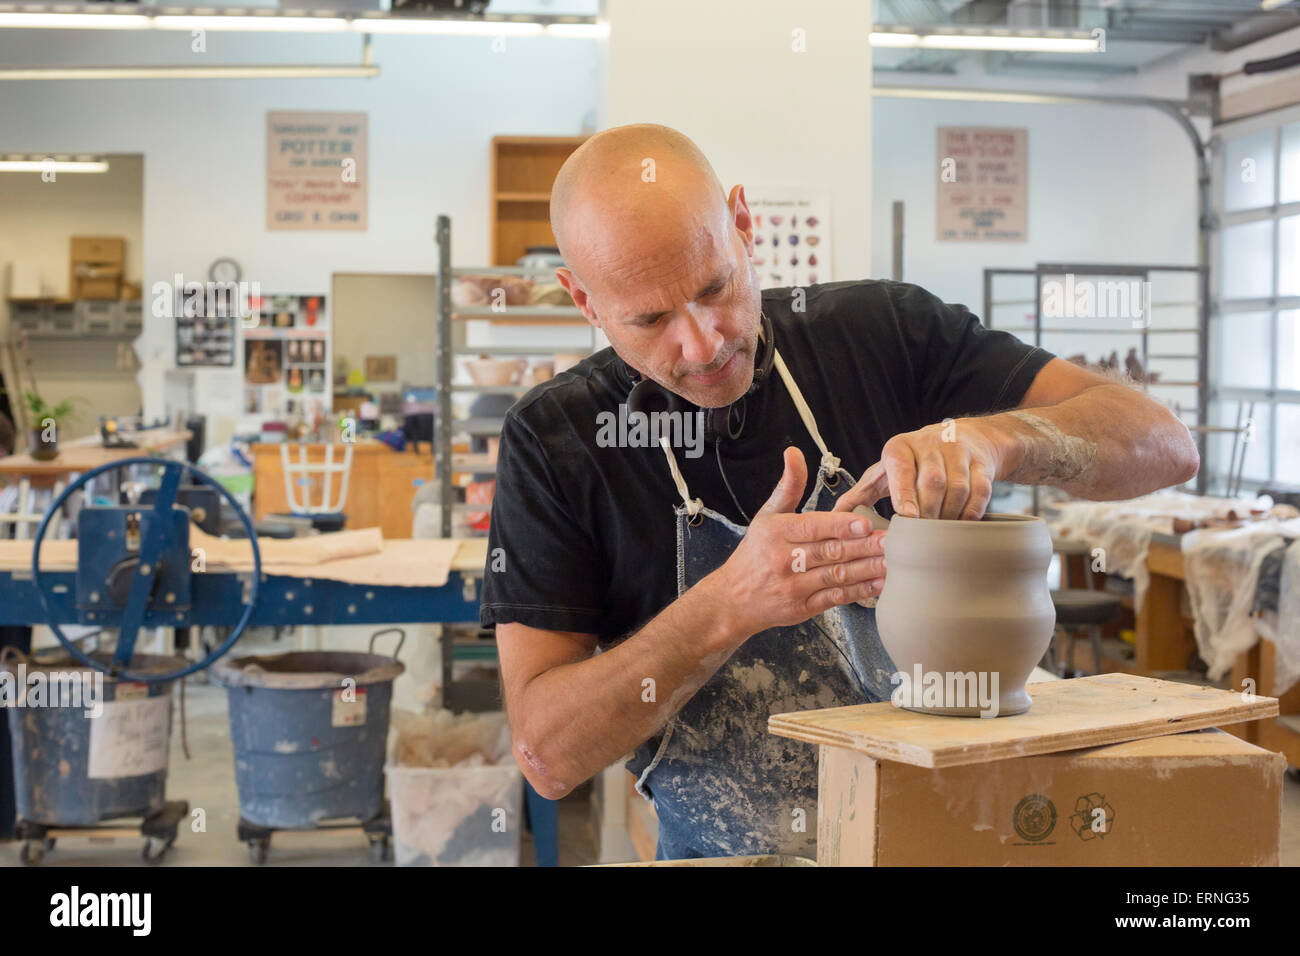 Biloxi, Mississippi - A potter works in the City of Biloxi Center for Ceramics at the Ohr-O'Keefe Museum of Art. Stock Photo